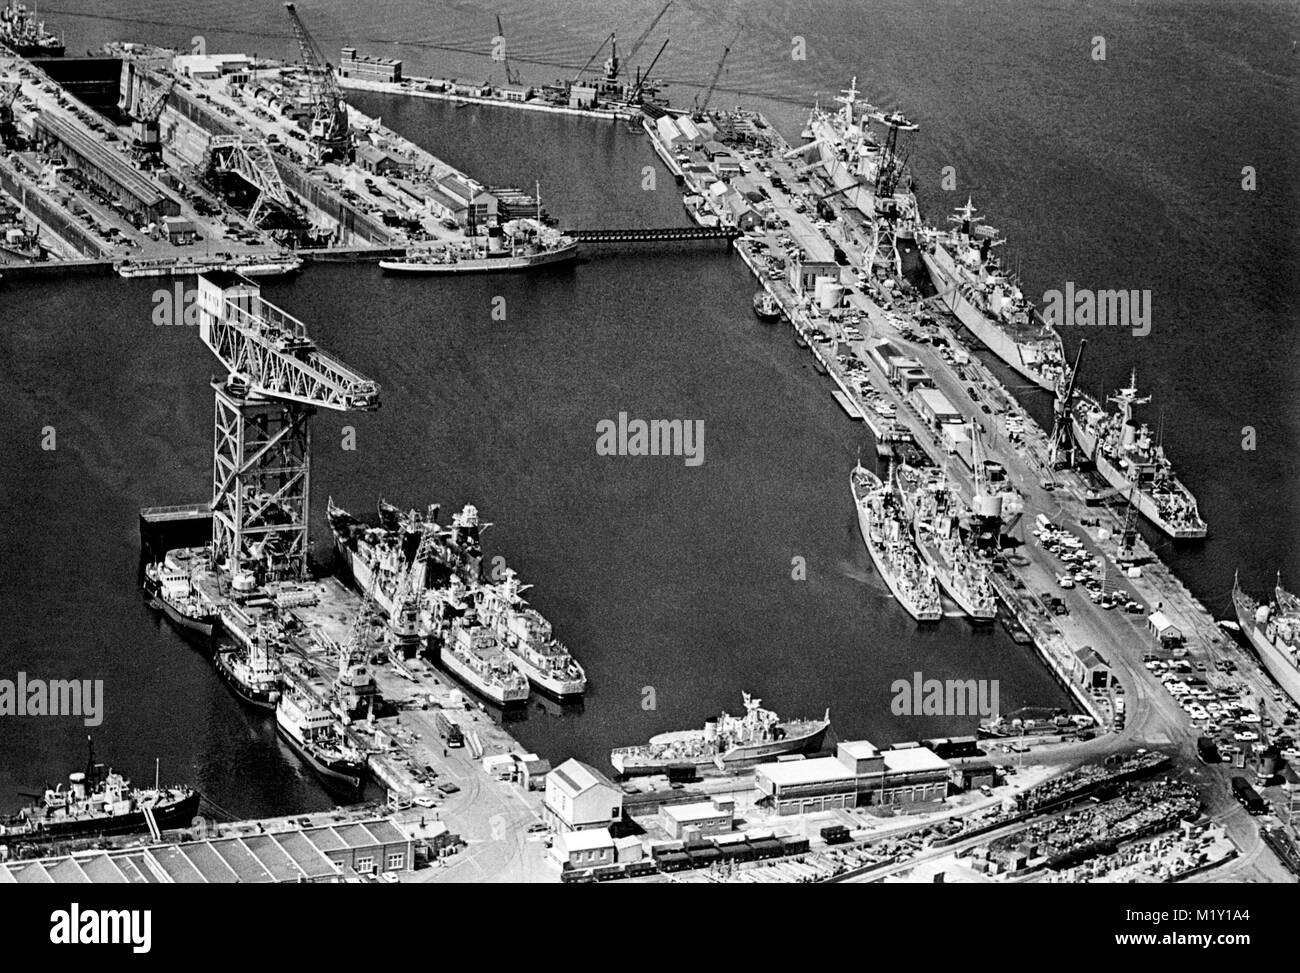 AJAXNETPHOTO. 19TH JANUARY, 1972. PORTSMOUTH, ENGLAND - NAVAL BASE - A GIANT 250 TON HAMMERHEAD CRANE DOMINATES NR 3 BASIN AND IS A LANDMARK FOR MILES AROUND THE CITY. THE BASIN WAS CREATED OUT OF THREE EARLIER BASINS. NORTH WEST WALL AND FOUNTAIN LAKE JETTY CAN BE SEEN TOP AND RIGHT. PHOTO:JONATHAN EASTLAND/AJAX REF:357241 PNB 01 Stock Photo